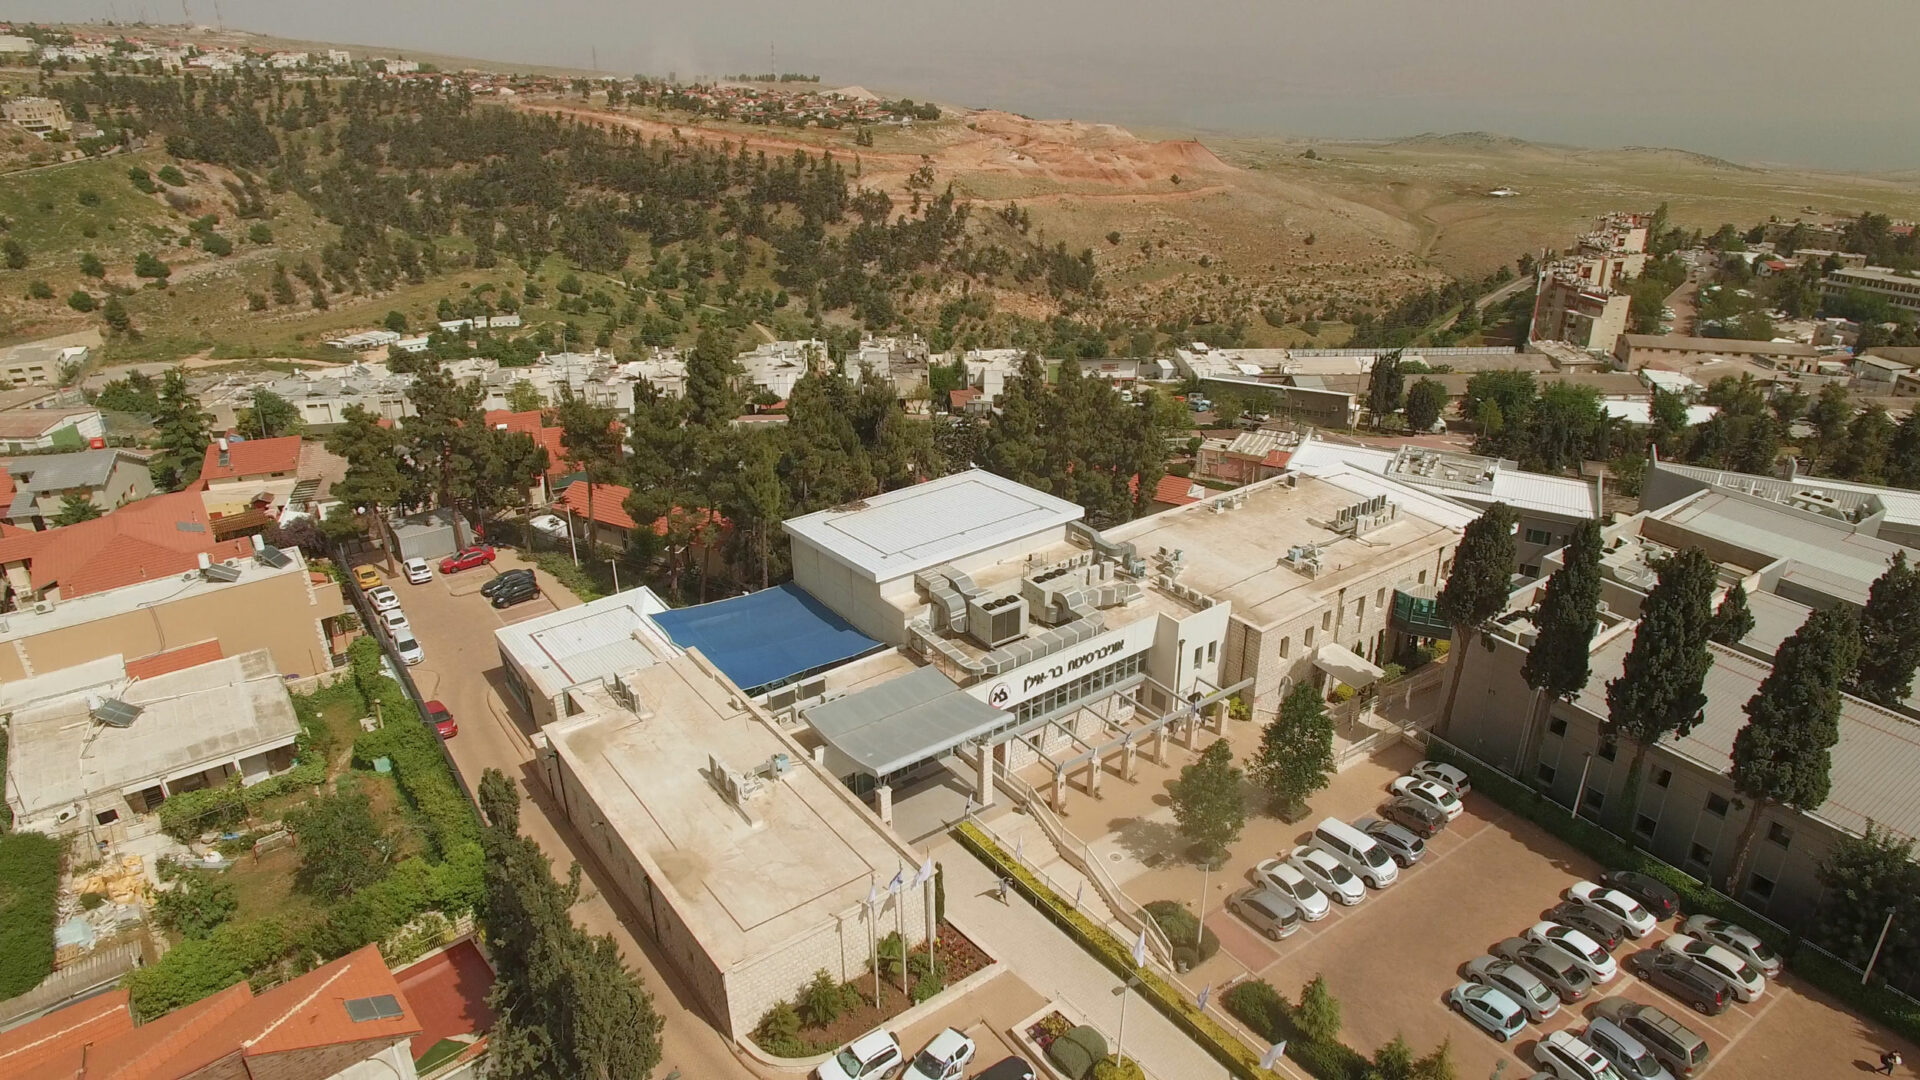 Many people in the Galilee live in villages without easy access to medical care, so the establishment of the medical school to teach students along with its commitment to its residents has made it an integral part of the community.